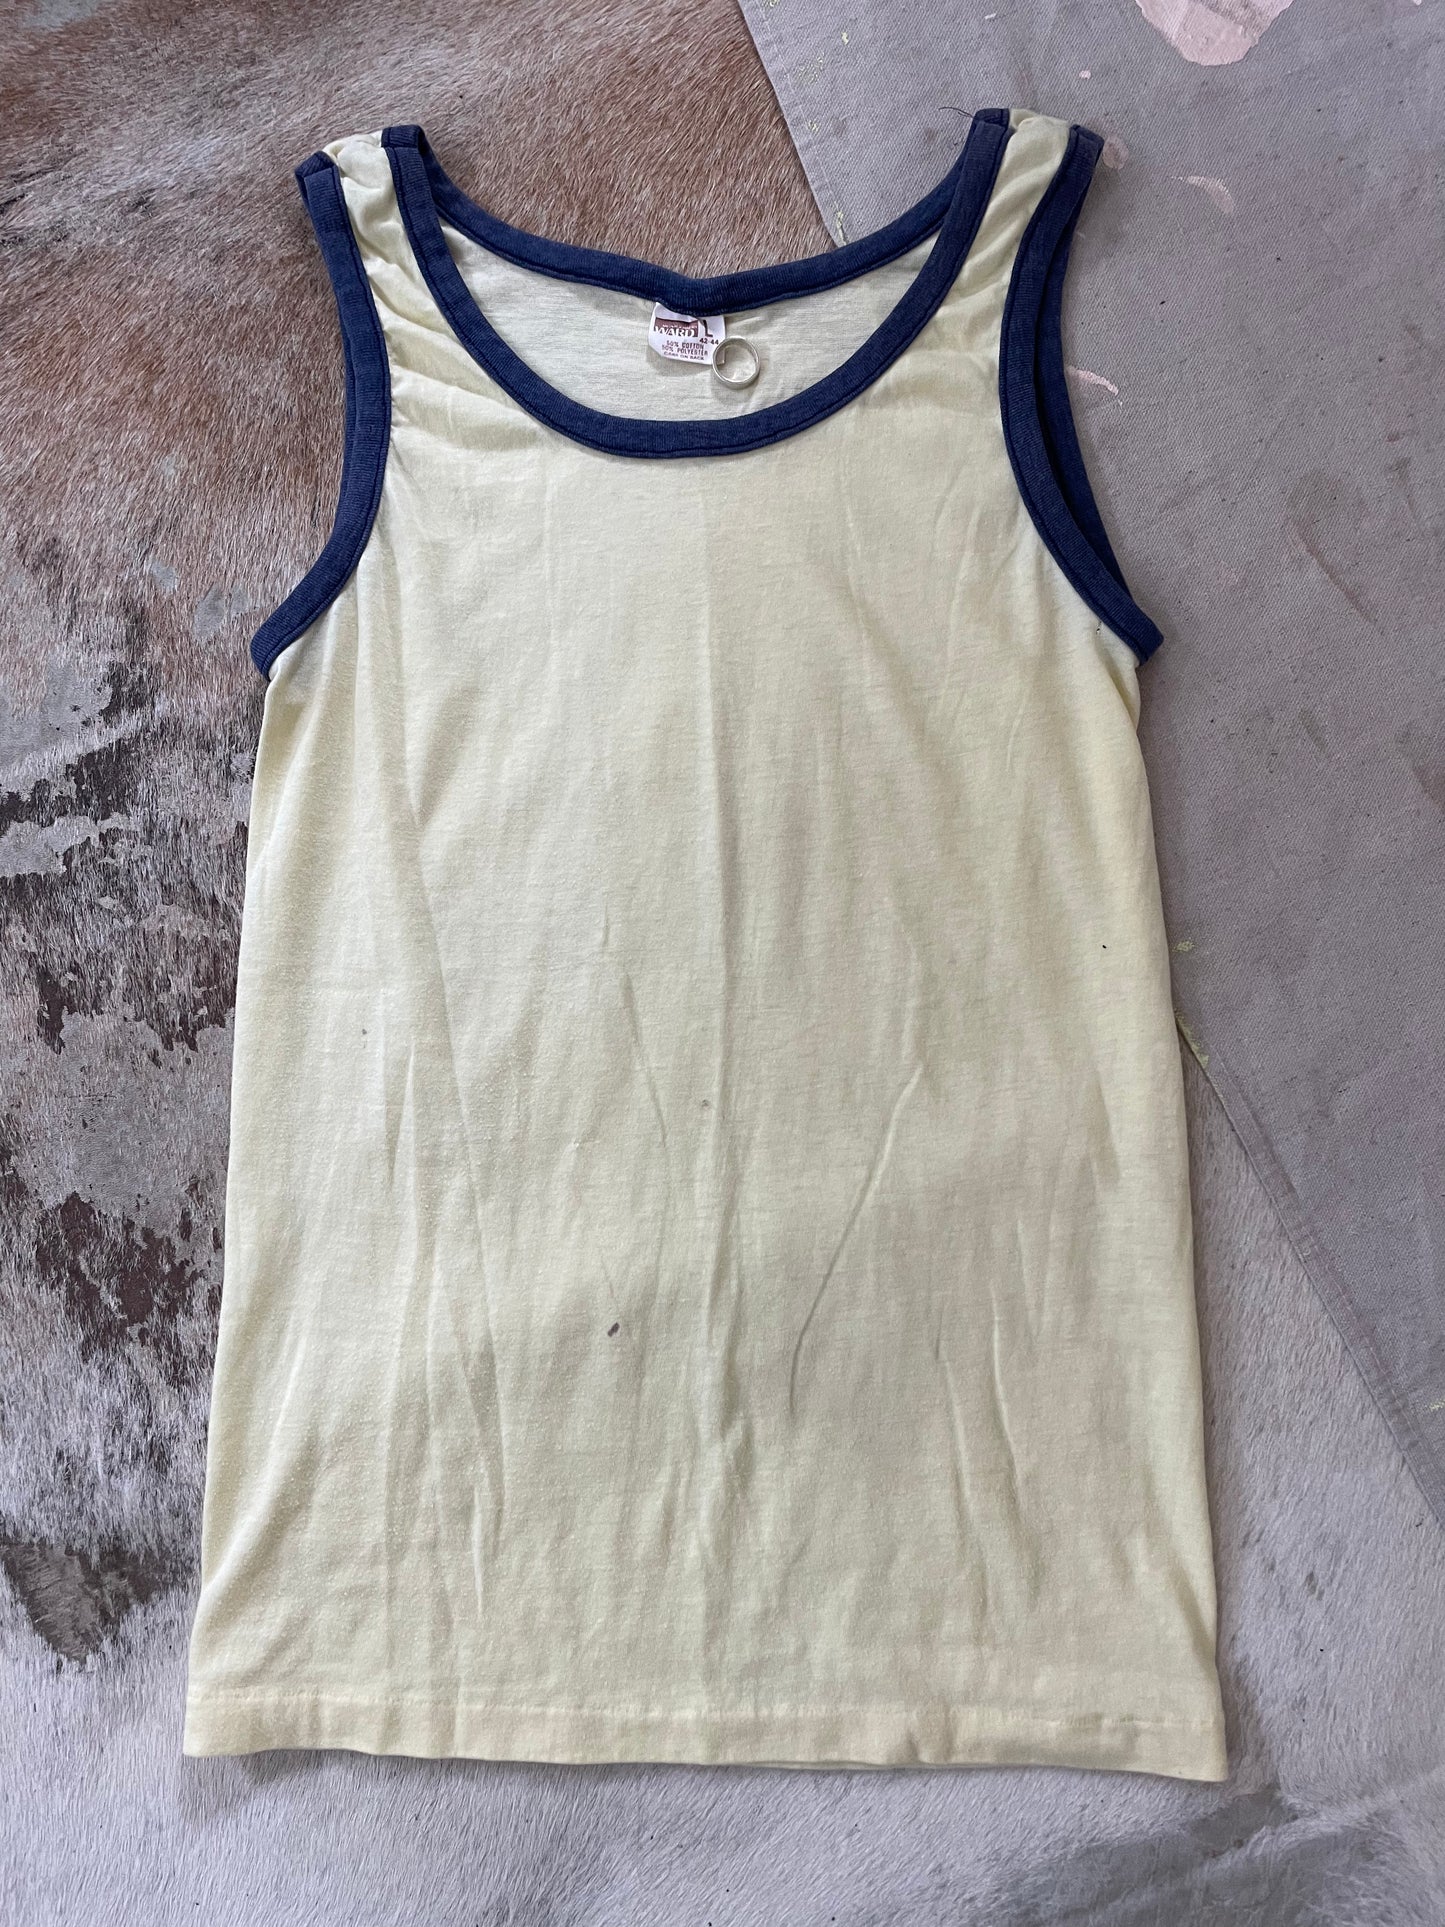 70s/80s Pale Yellow and Blue Tank Top